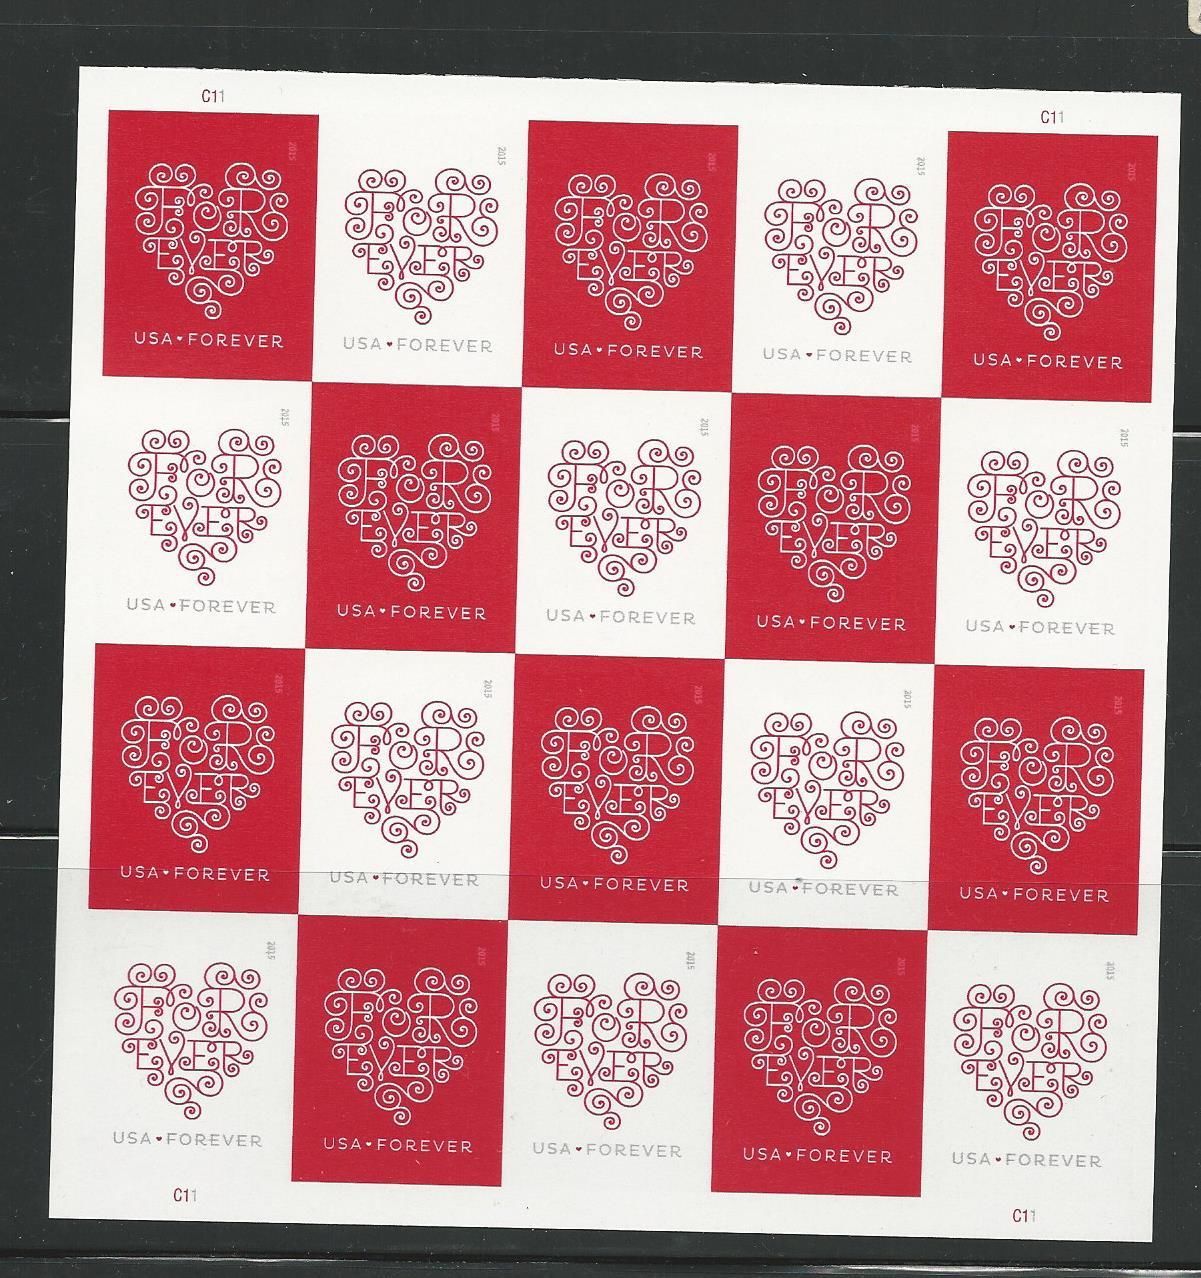 4955-56i Forever Hearts Imperf Mint Sheet of 20 from press sheet #4955-6iish